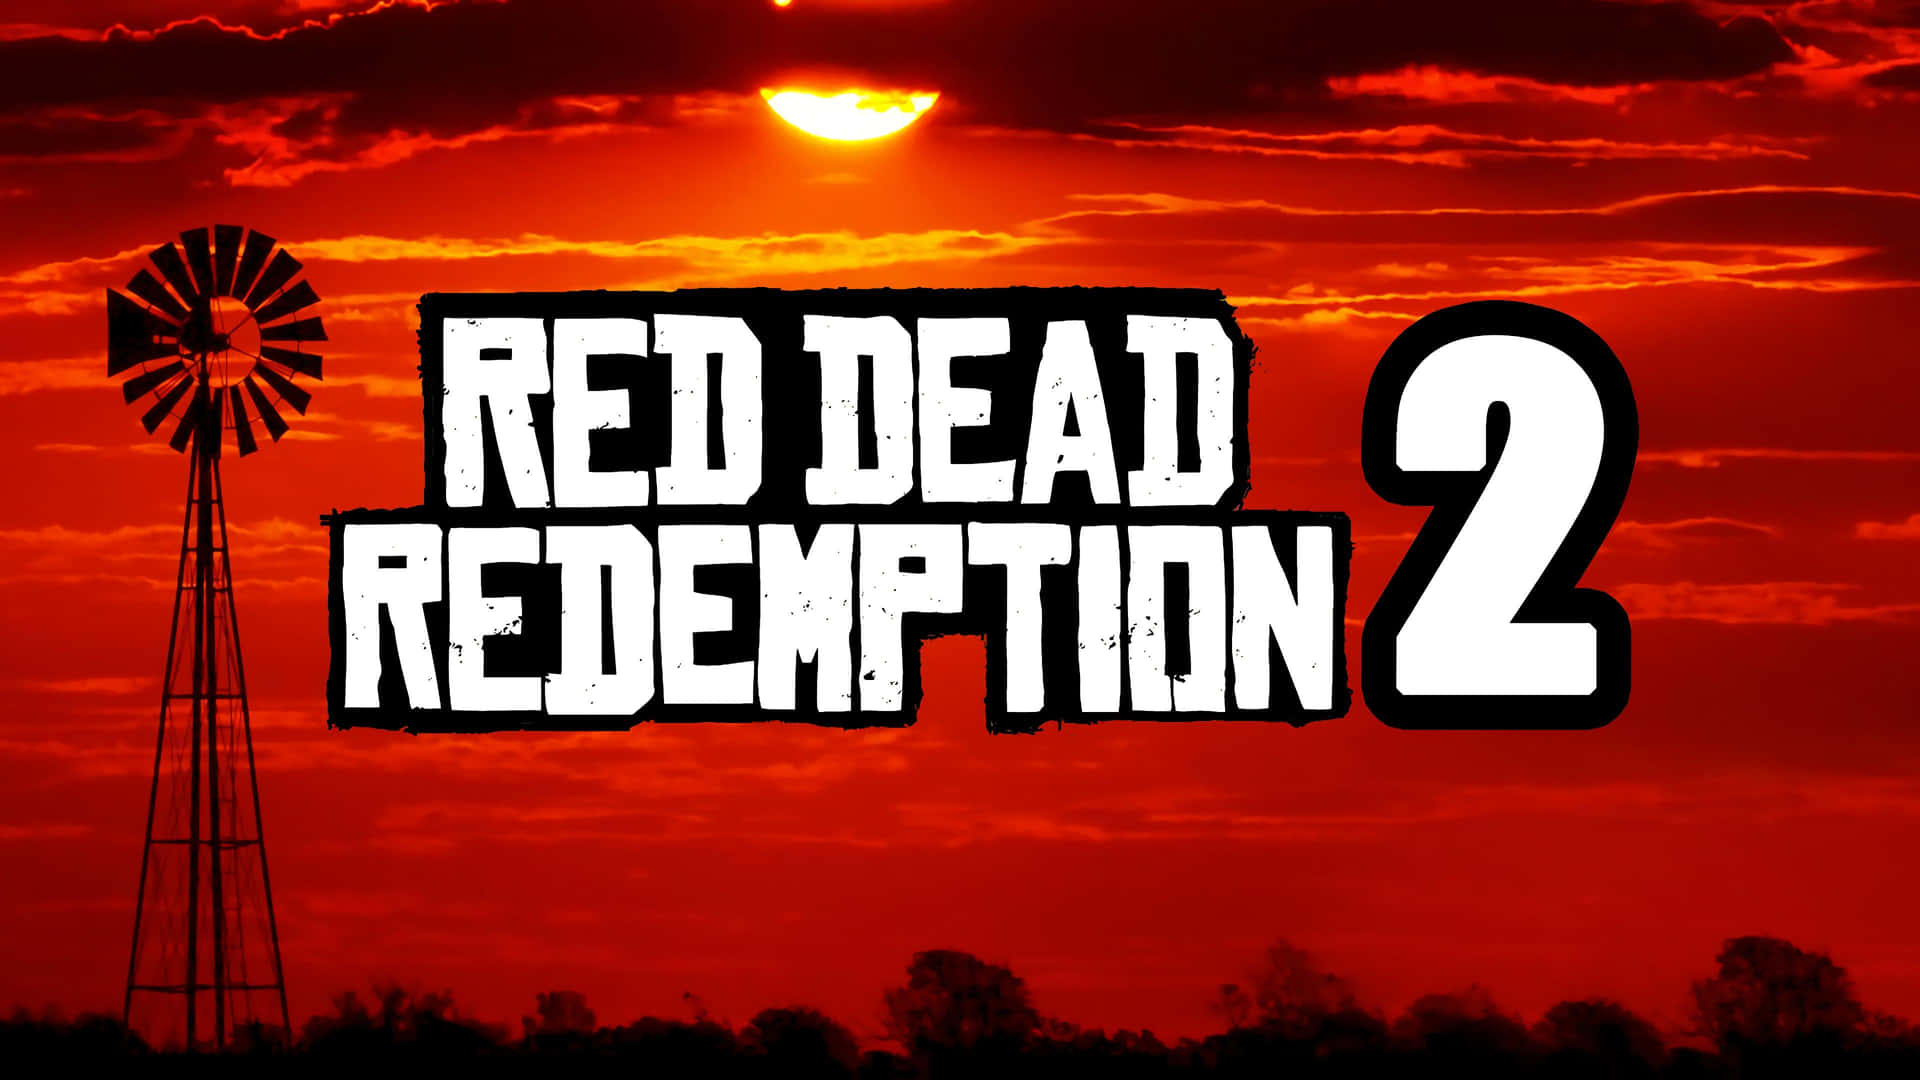 Ride off into the sunset with Red Dead Redemption 2 Full HD Wallpaper